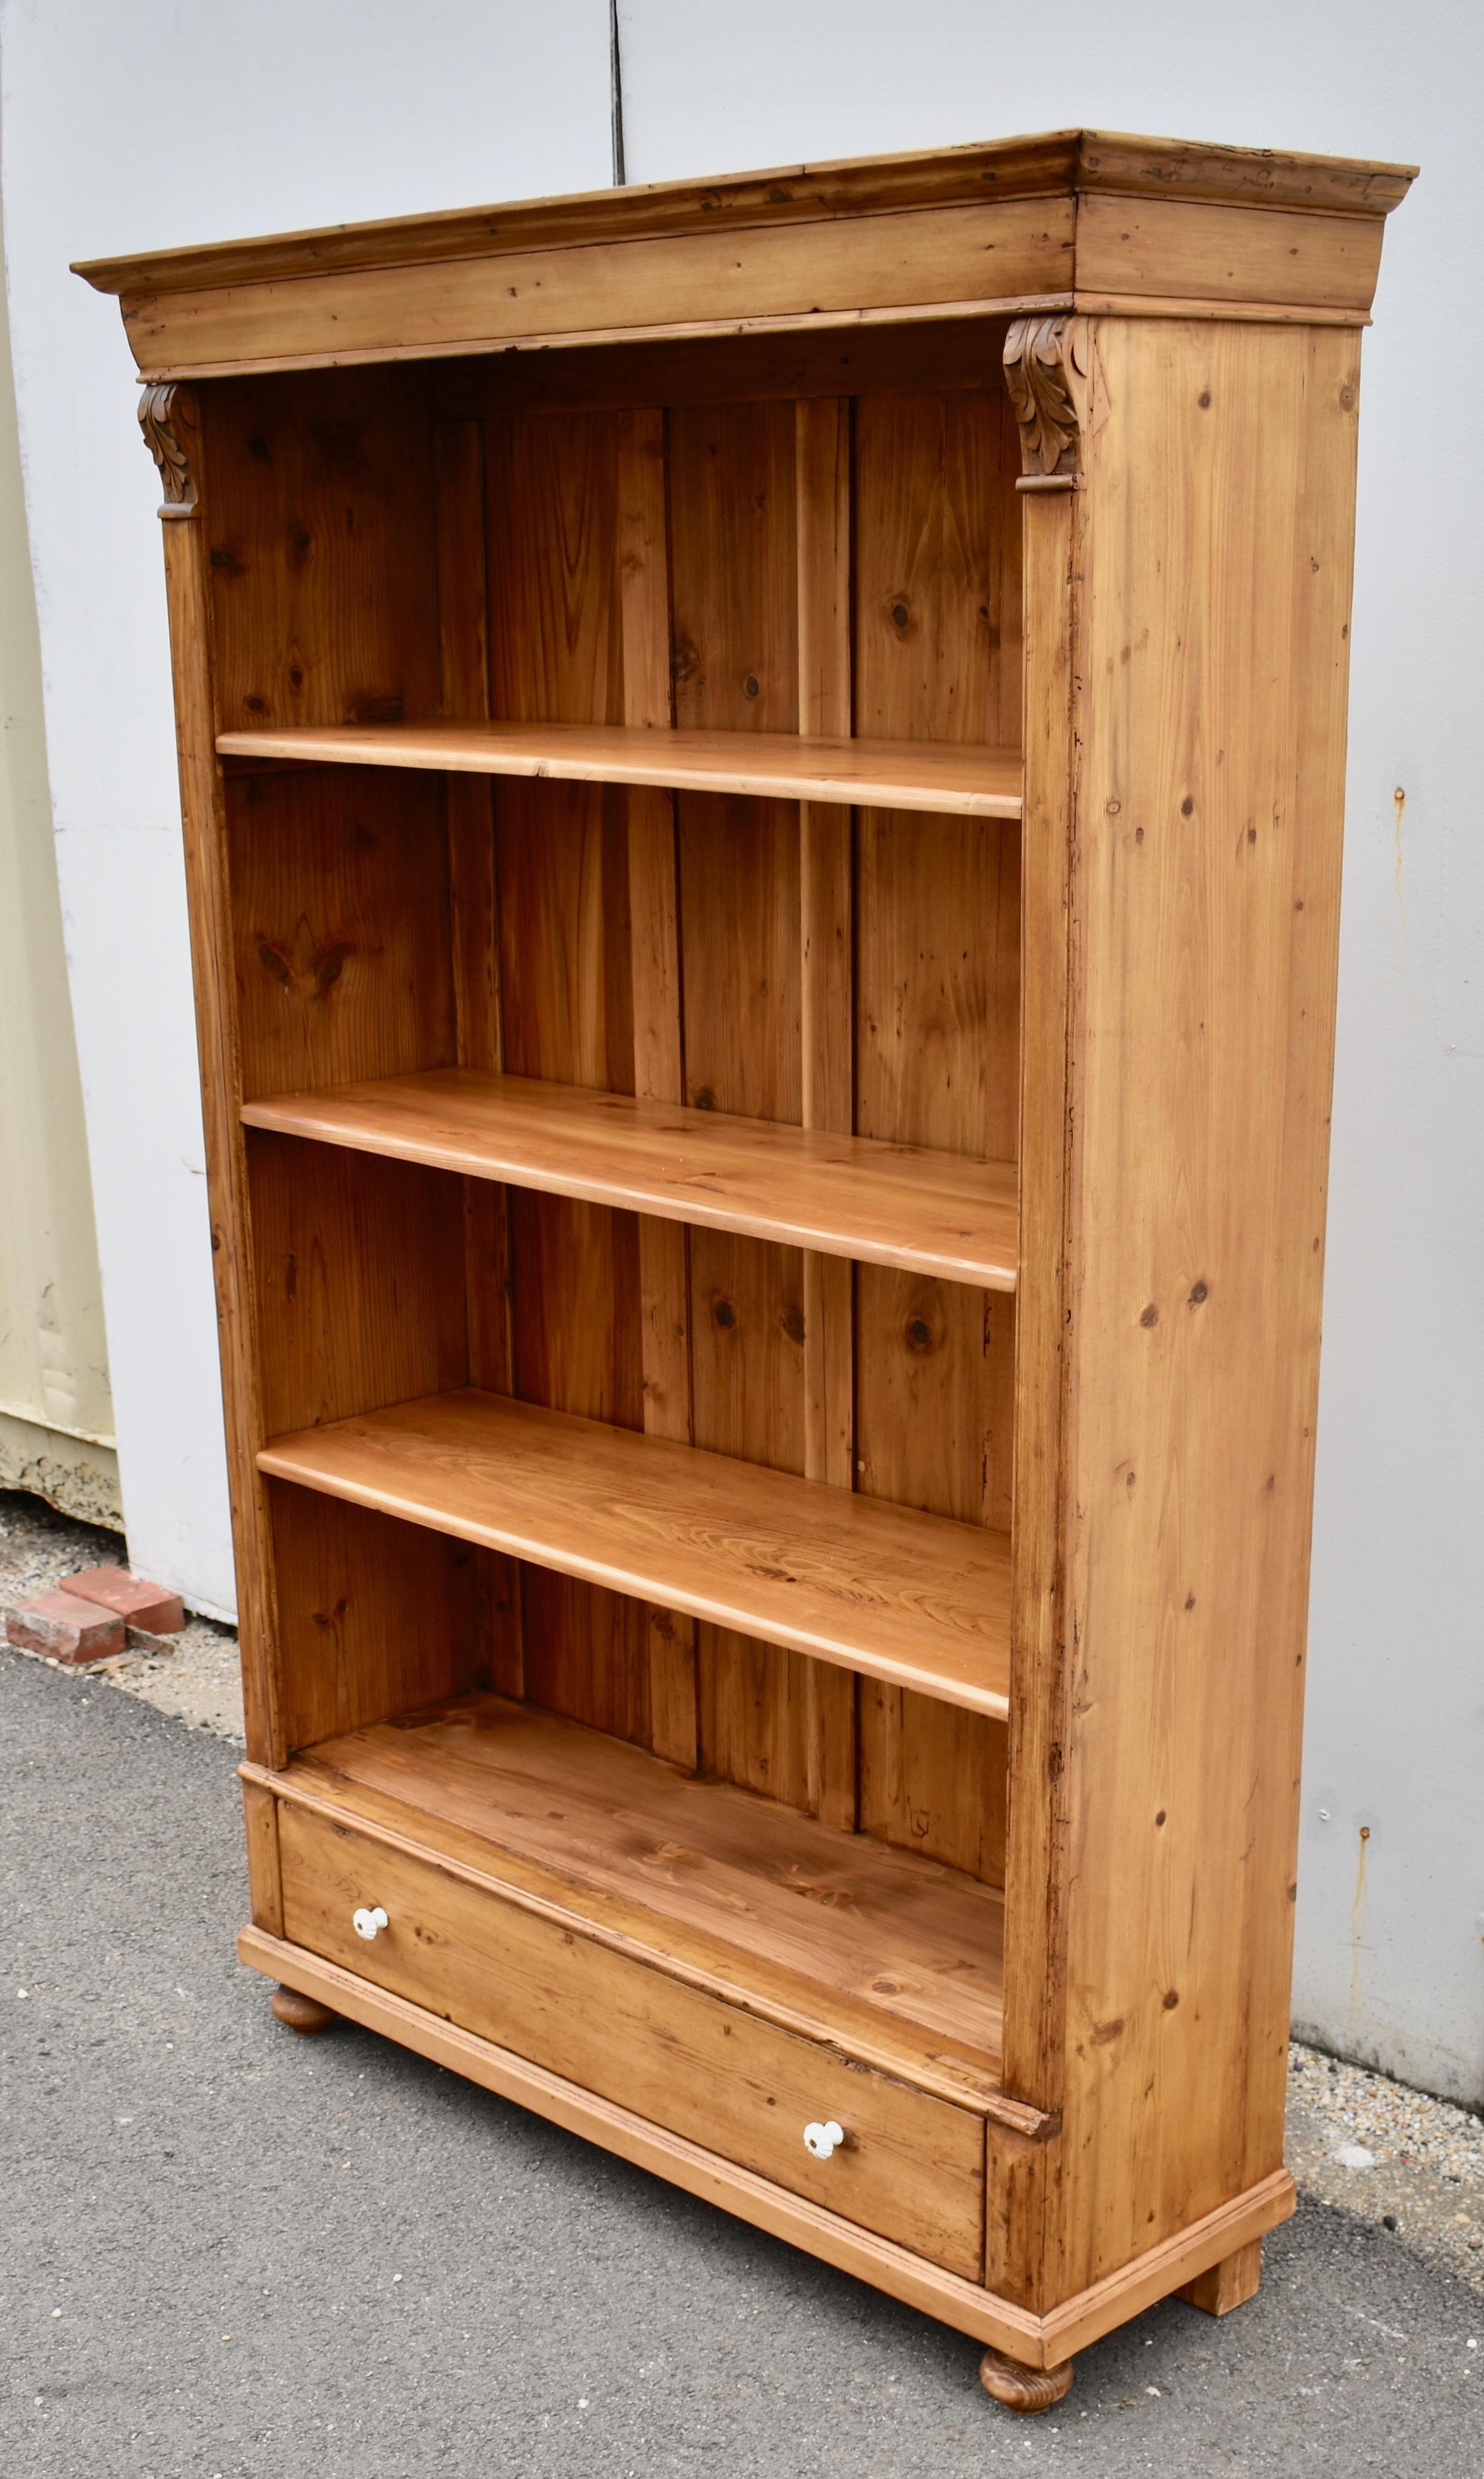 Dutch Vintage Pine Open Bookcase from Armoire